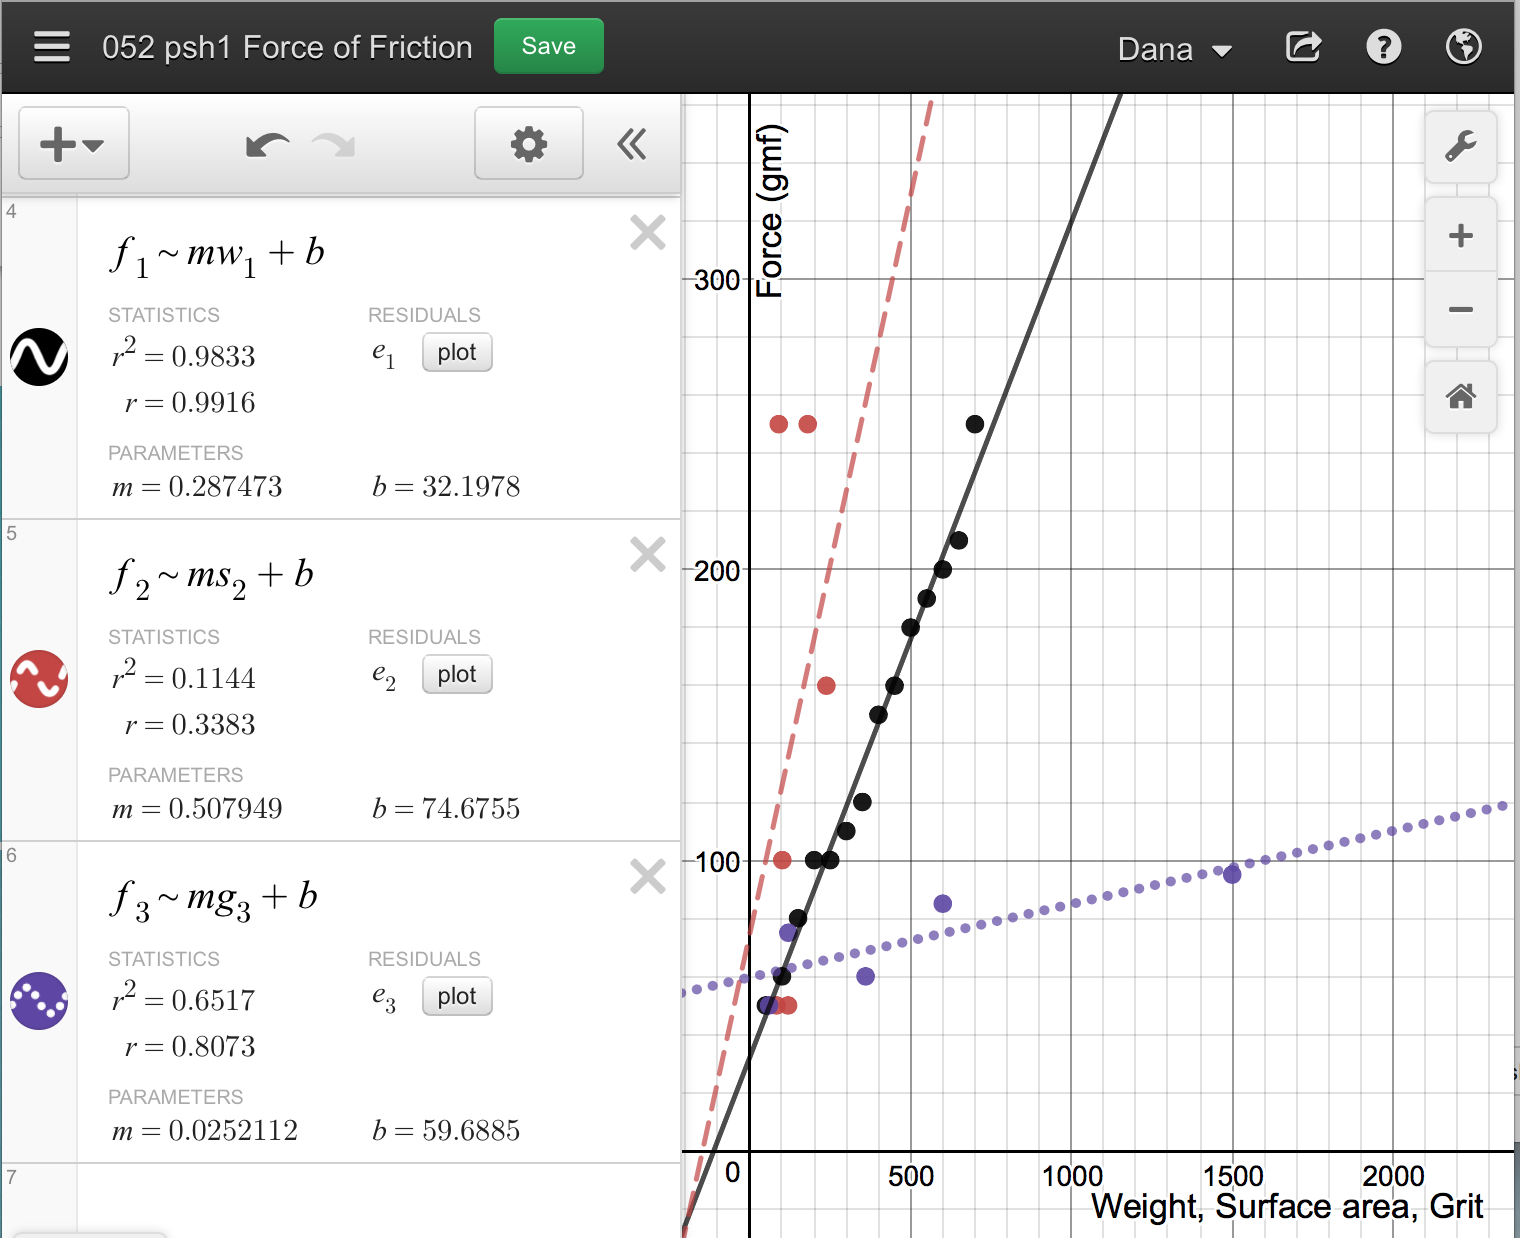 force of friction linear regression graphs for surface area, grit, weight